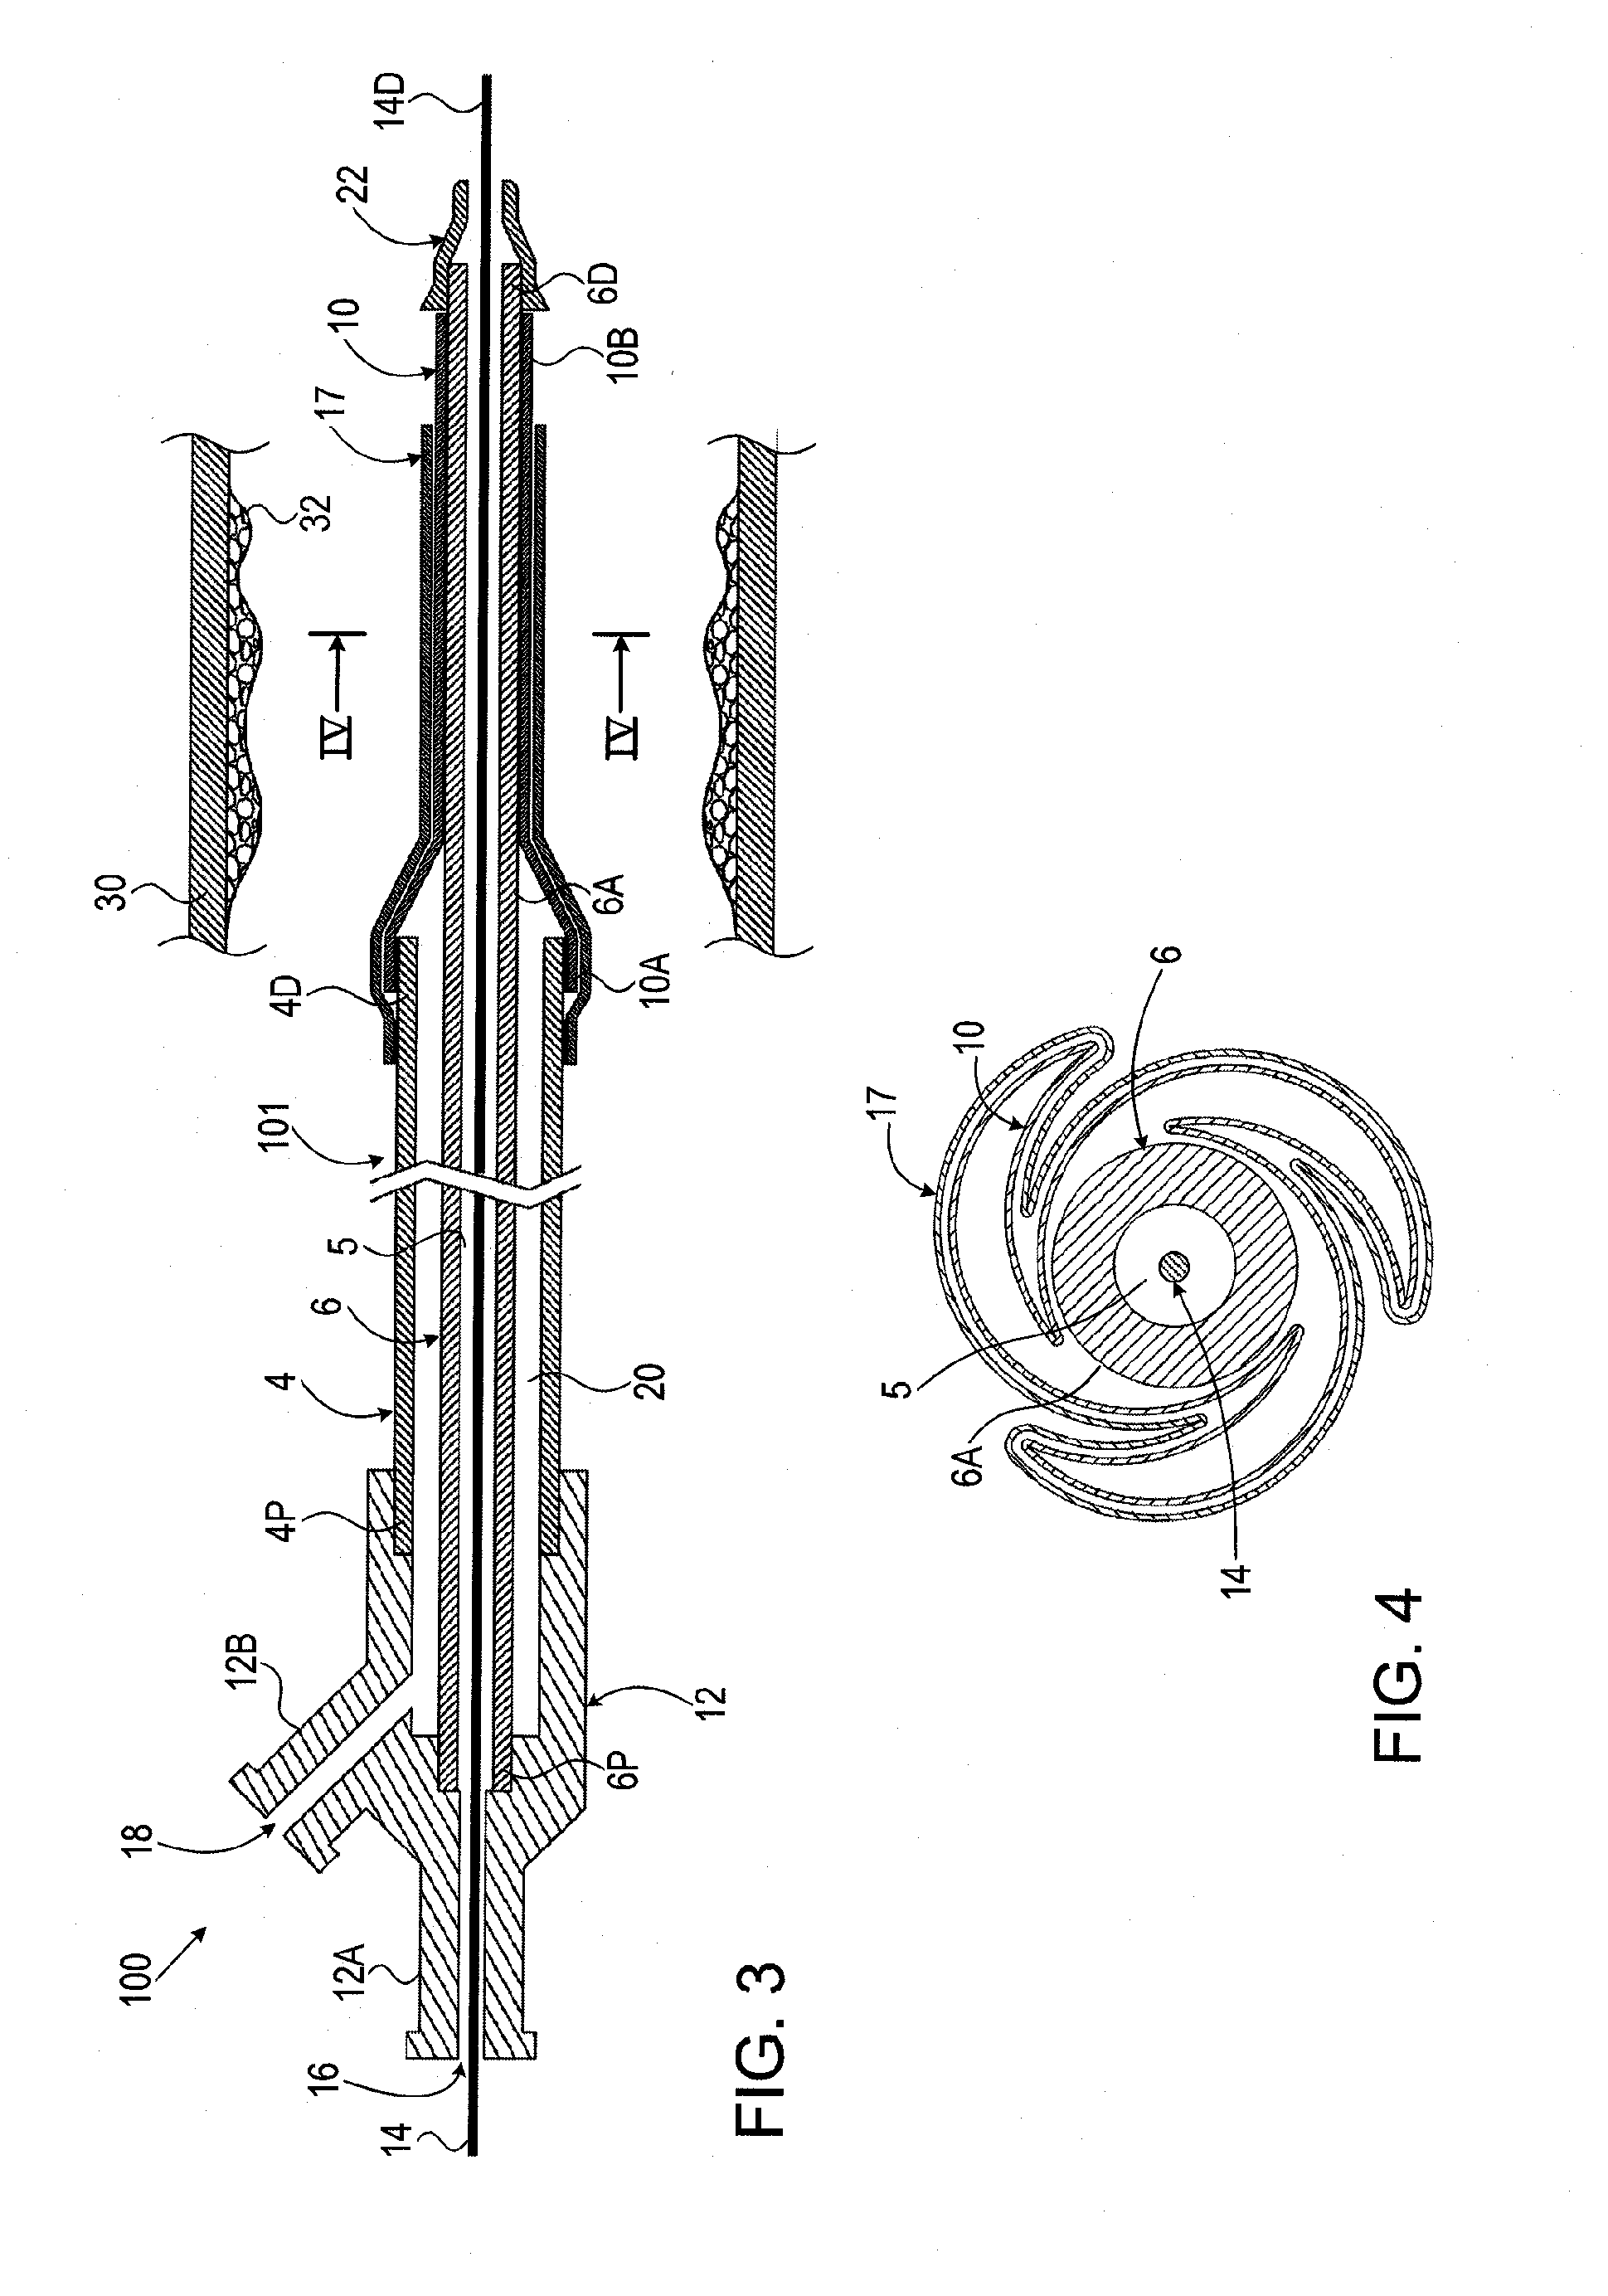 Balloon catheter and methods of use thereof